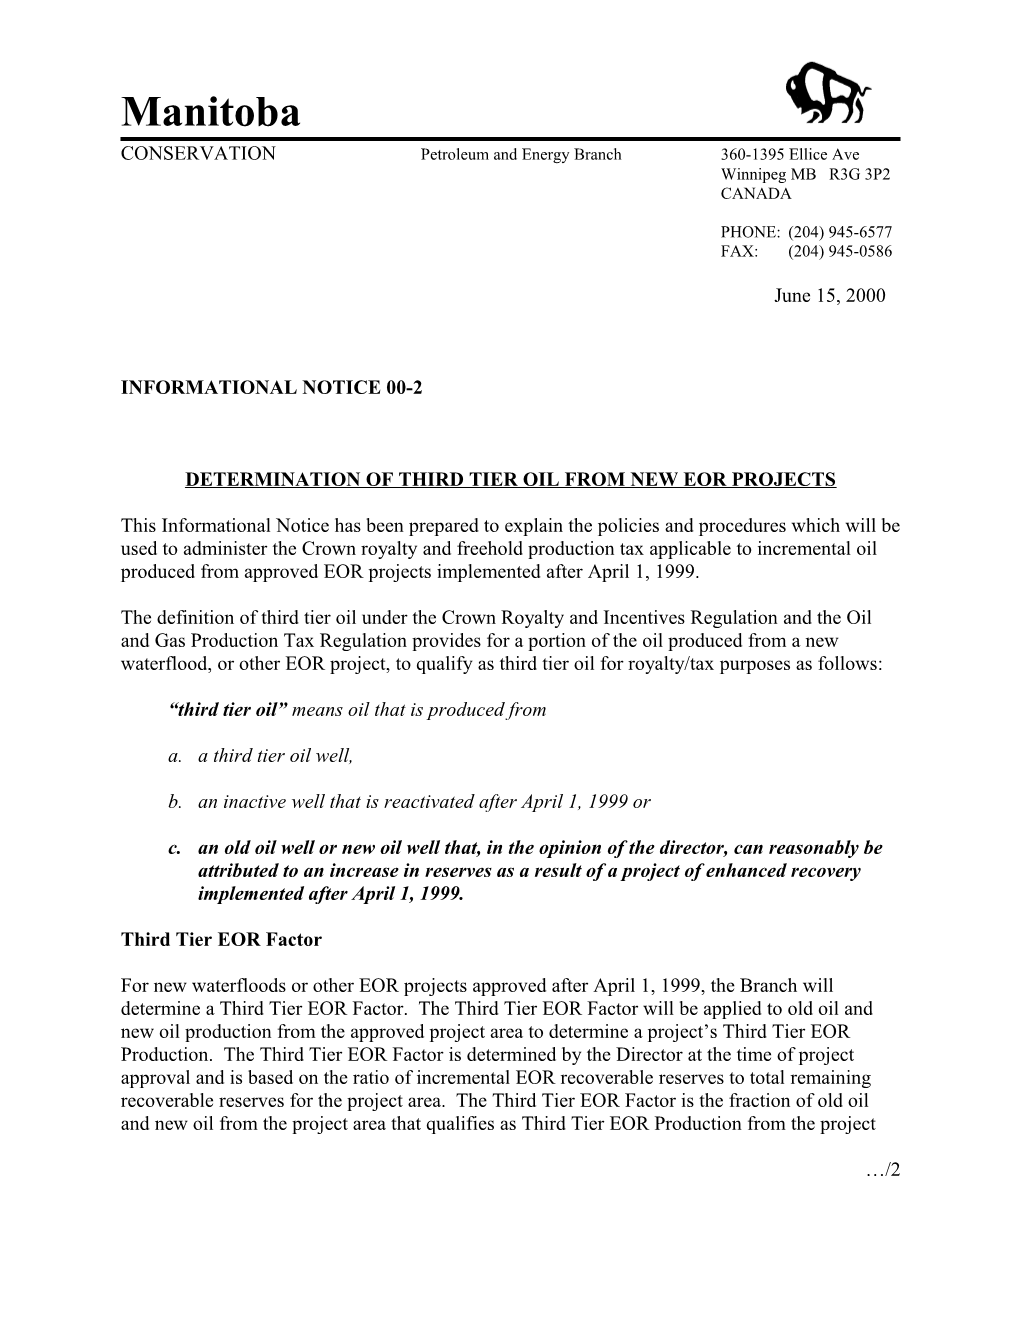 Determination of Third Tier Oil from New Eor Projects